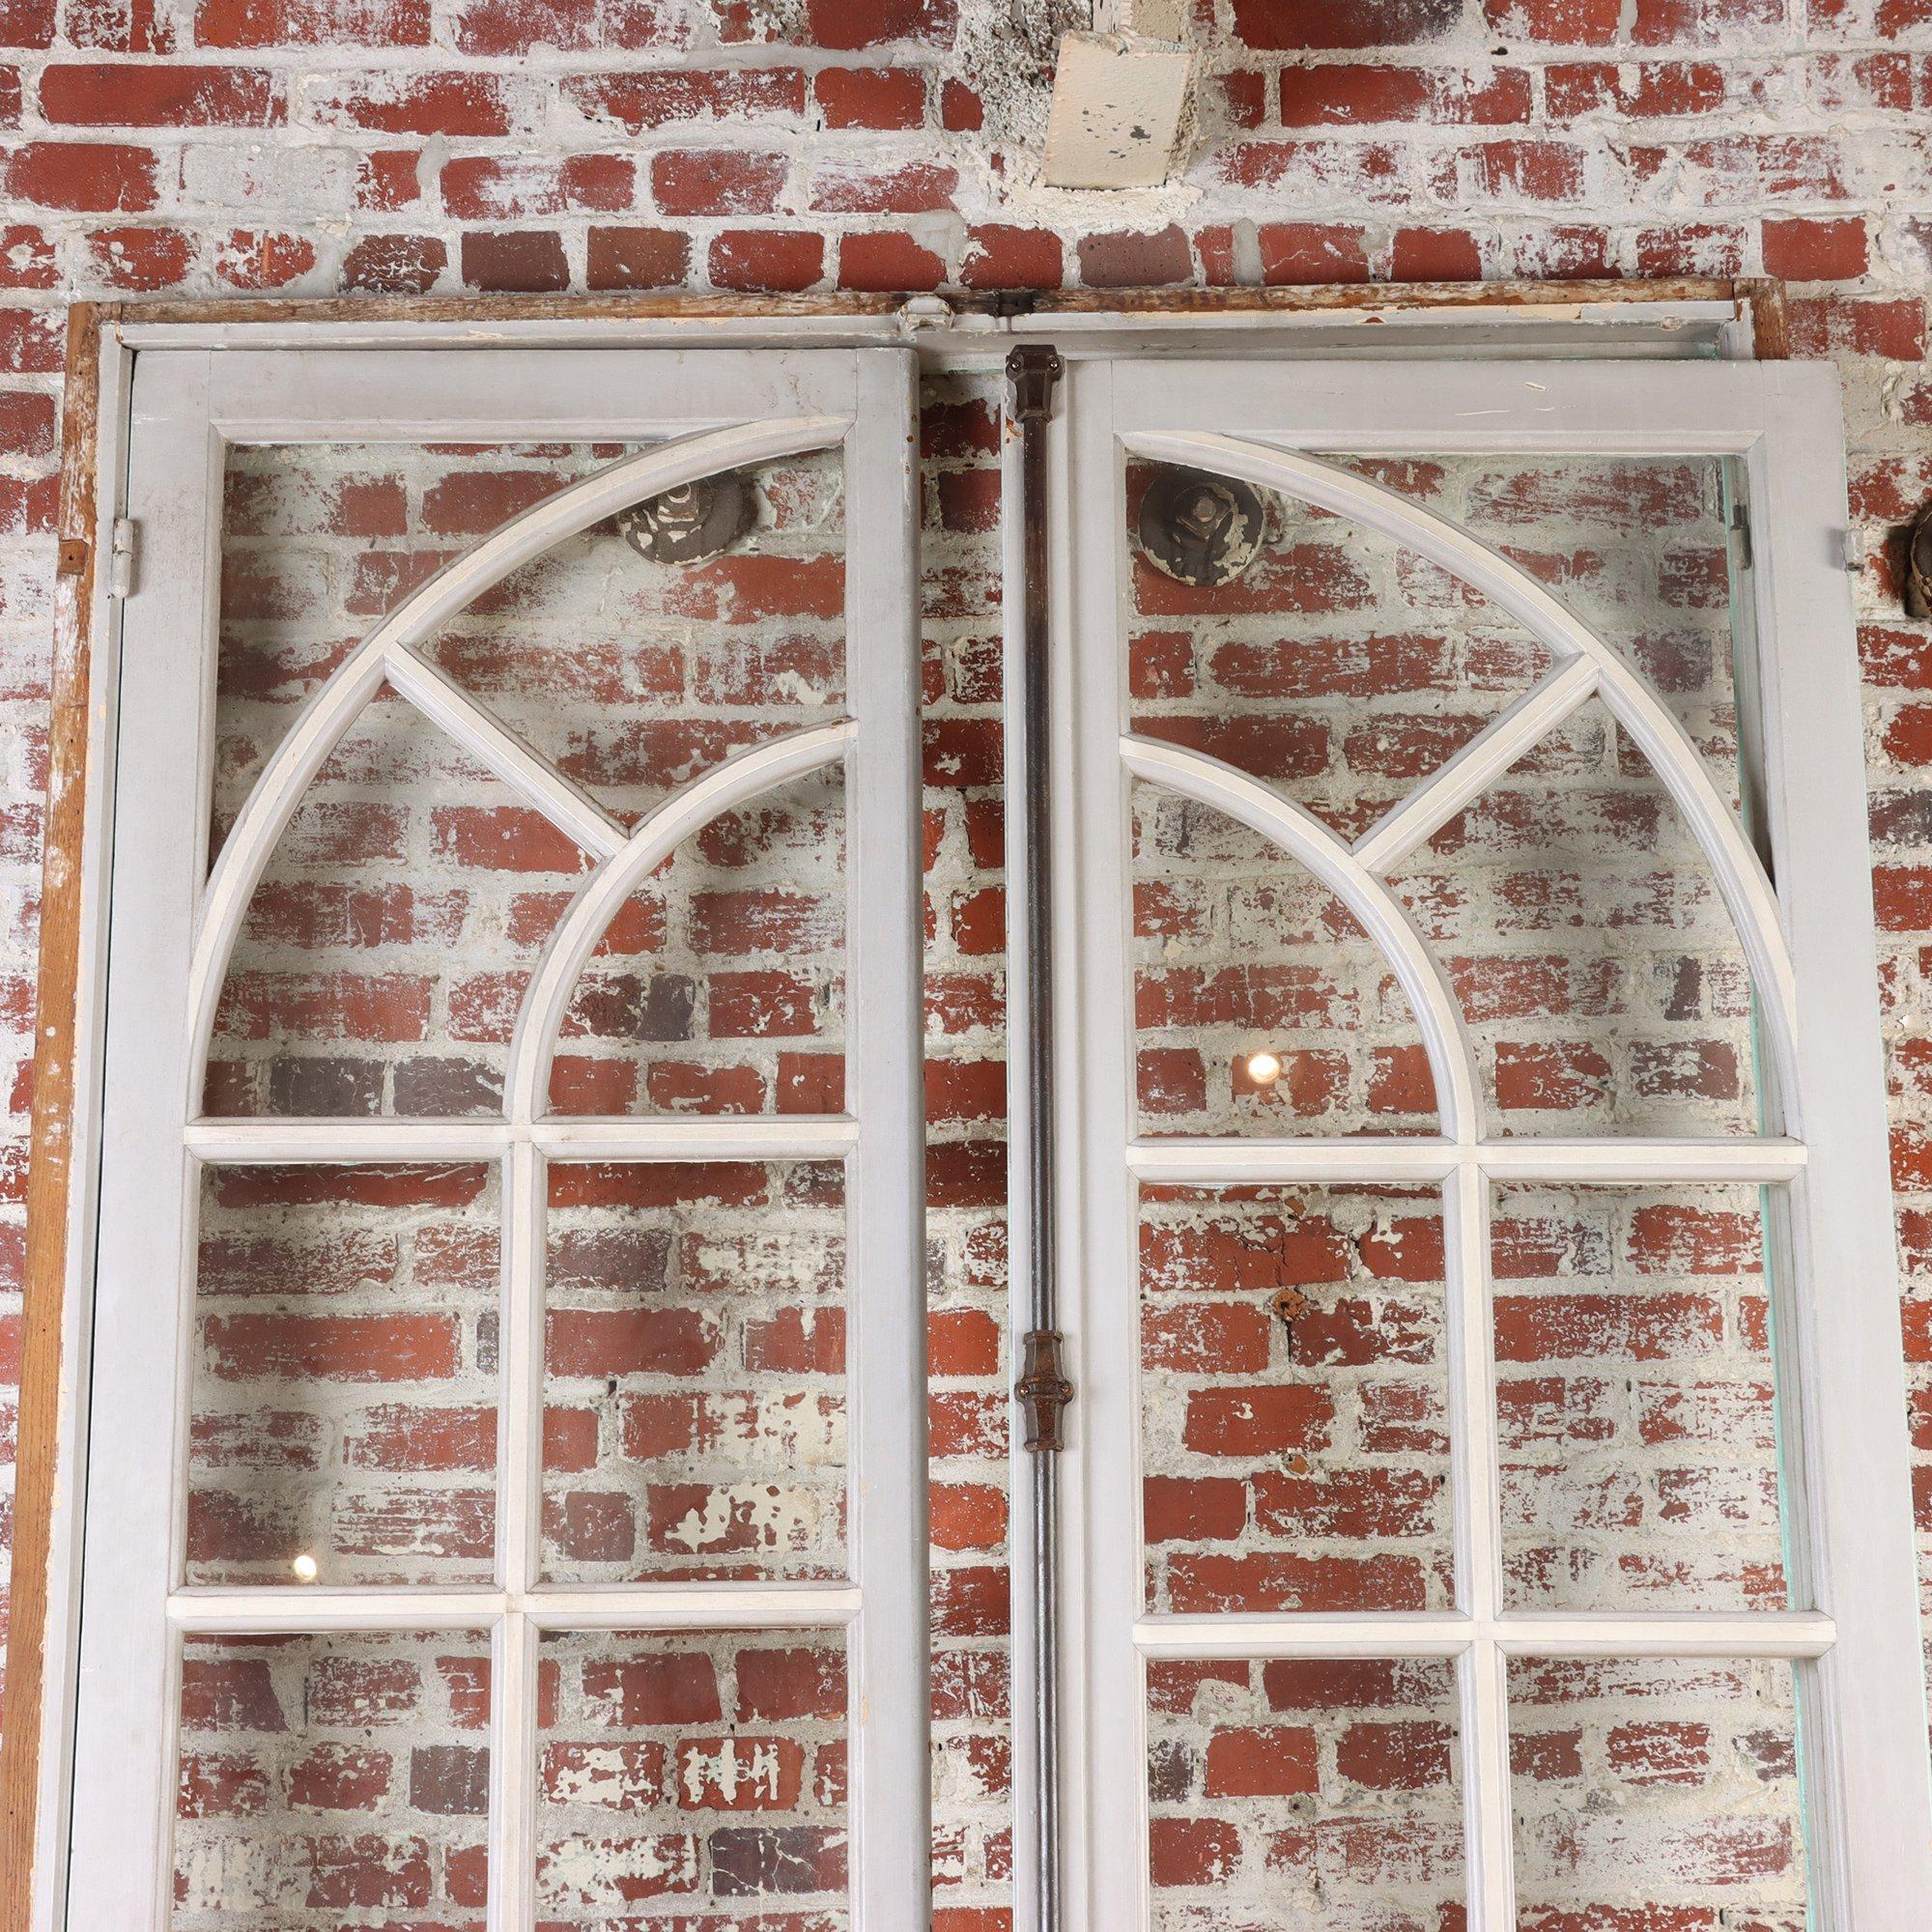 A pair of painted French doors with individual panes featuring an arched design. The doors have their original iron hardware. C 1900. Two pair are available.